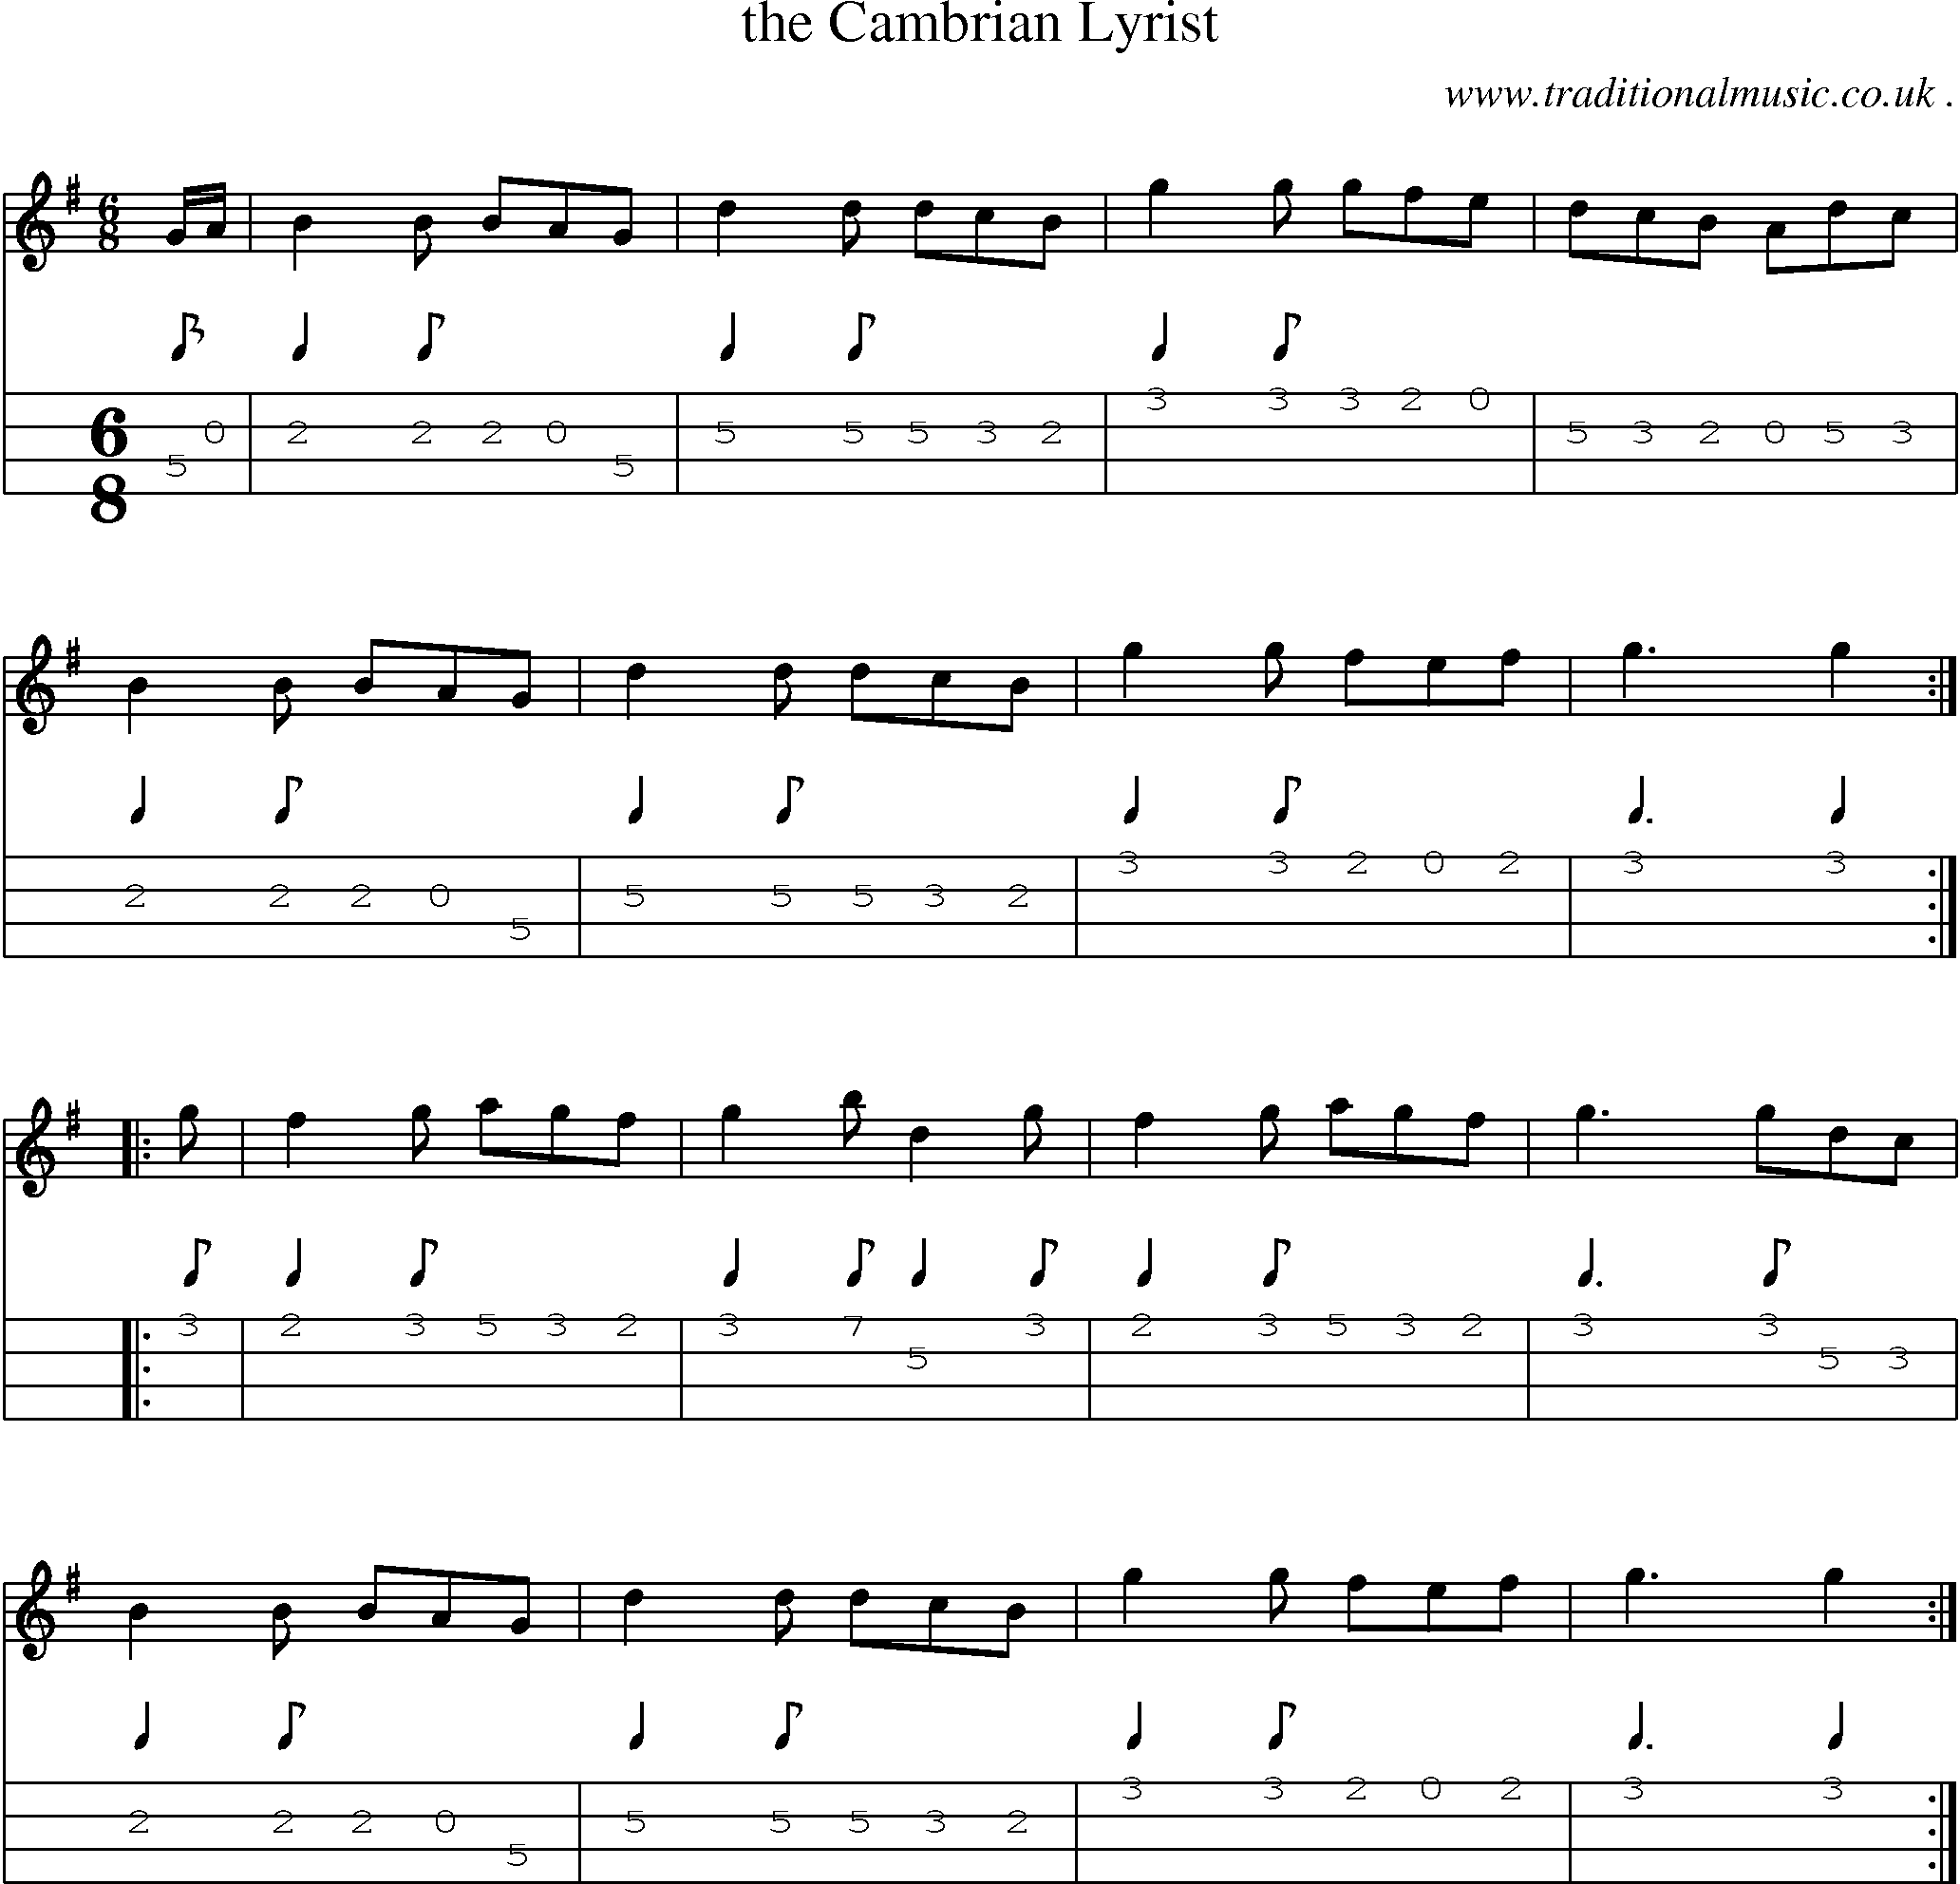 Sheet-Music and Mandolin Tabs for The Cambrian Lyrist